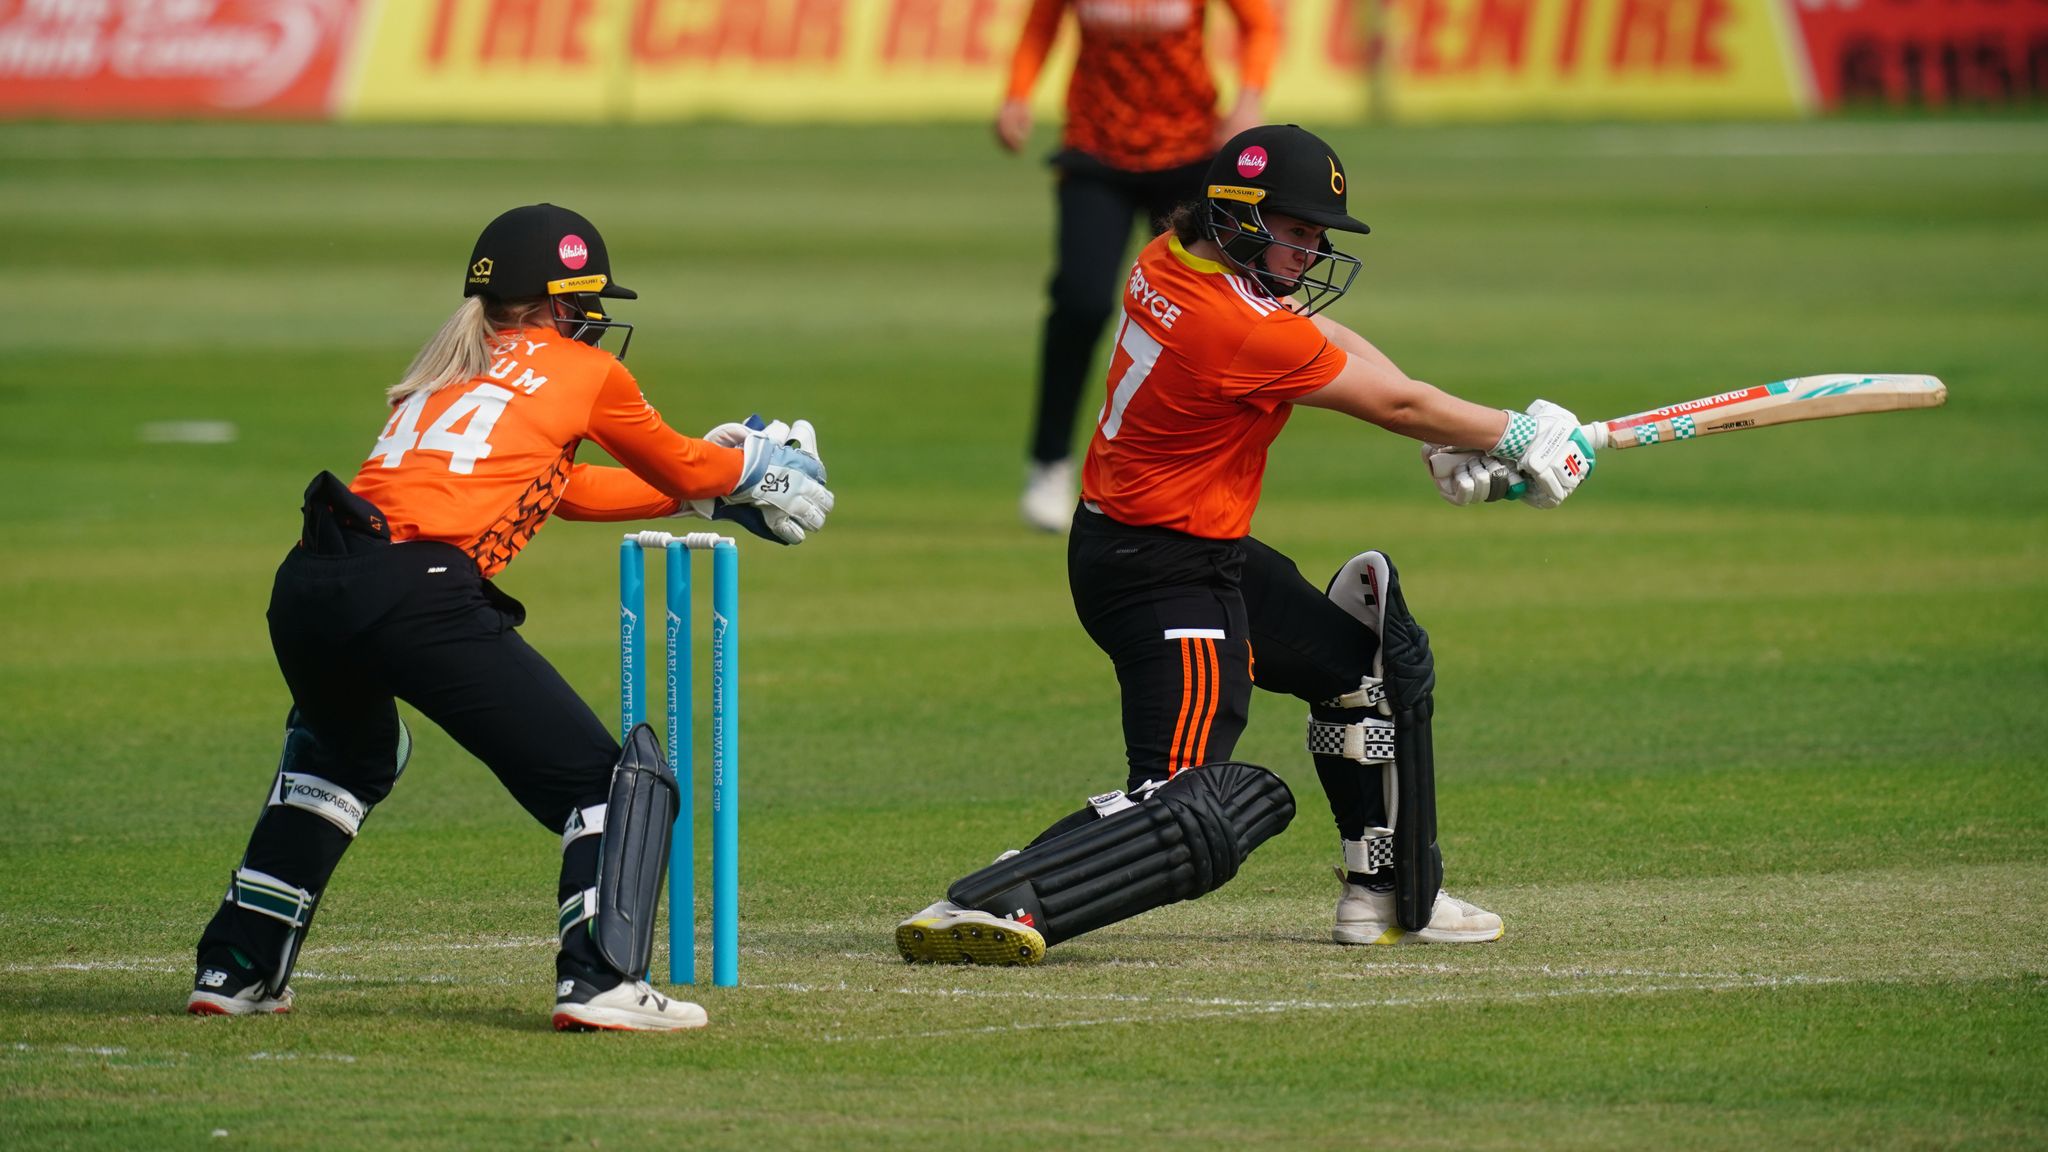 Southern Vipers Cricket Charlotte Edwards The Oval Surrey County Cricket Club T20 Blast 